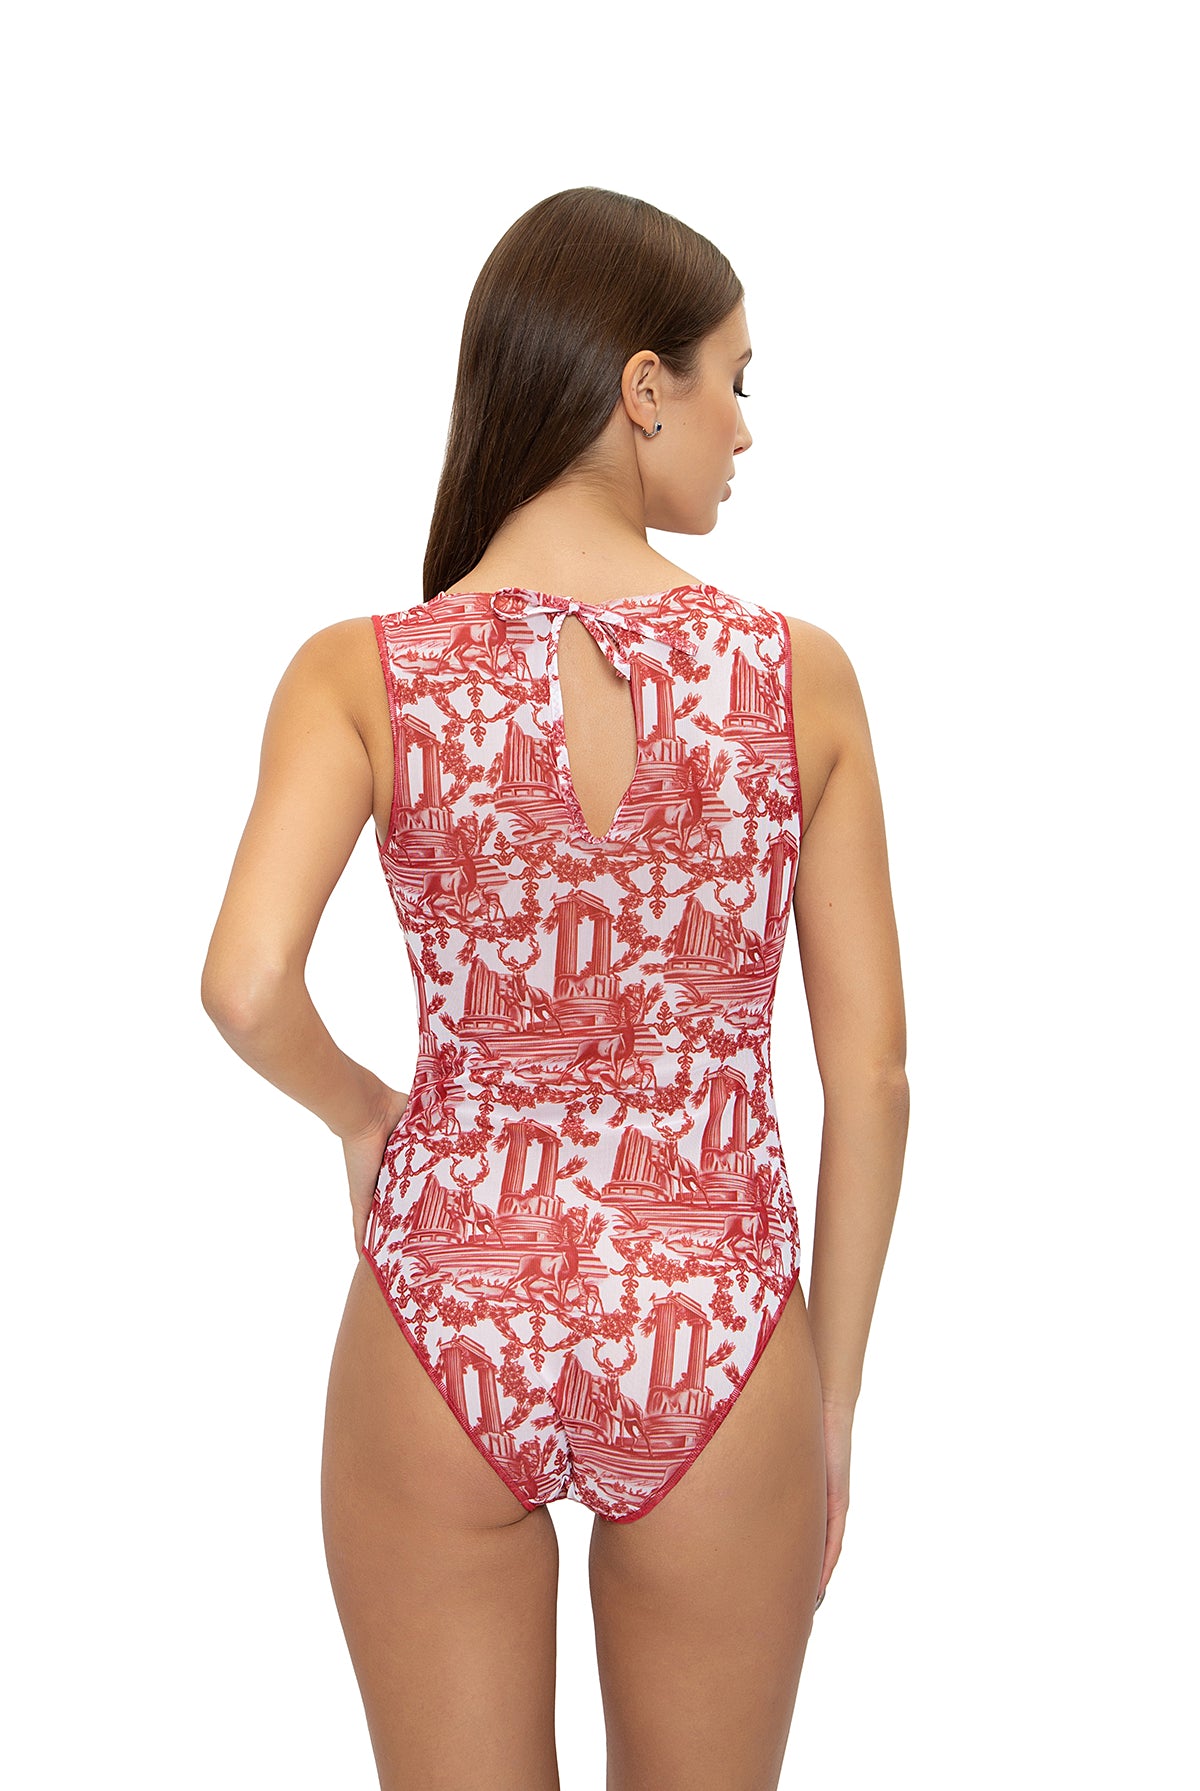 Experience timeless elegance with our Antic print sleeveless swimsuit. Achieve the perfect fit and SPF35 protection while indulging in classic luxury. Explore sustainable sophistication for your beach outings.